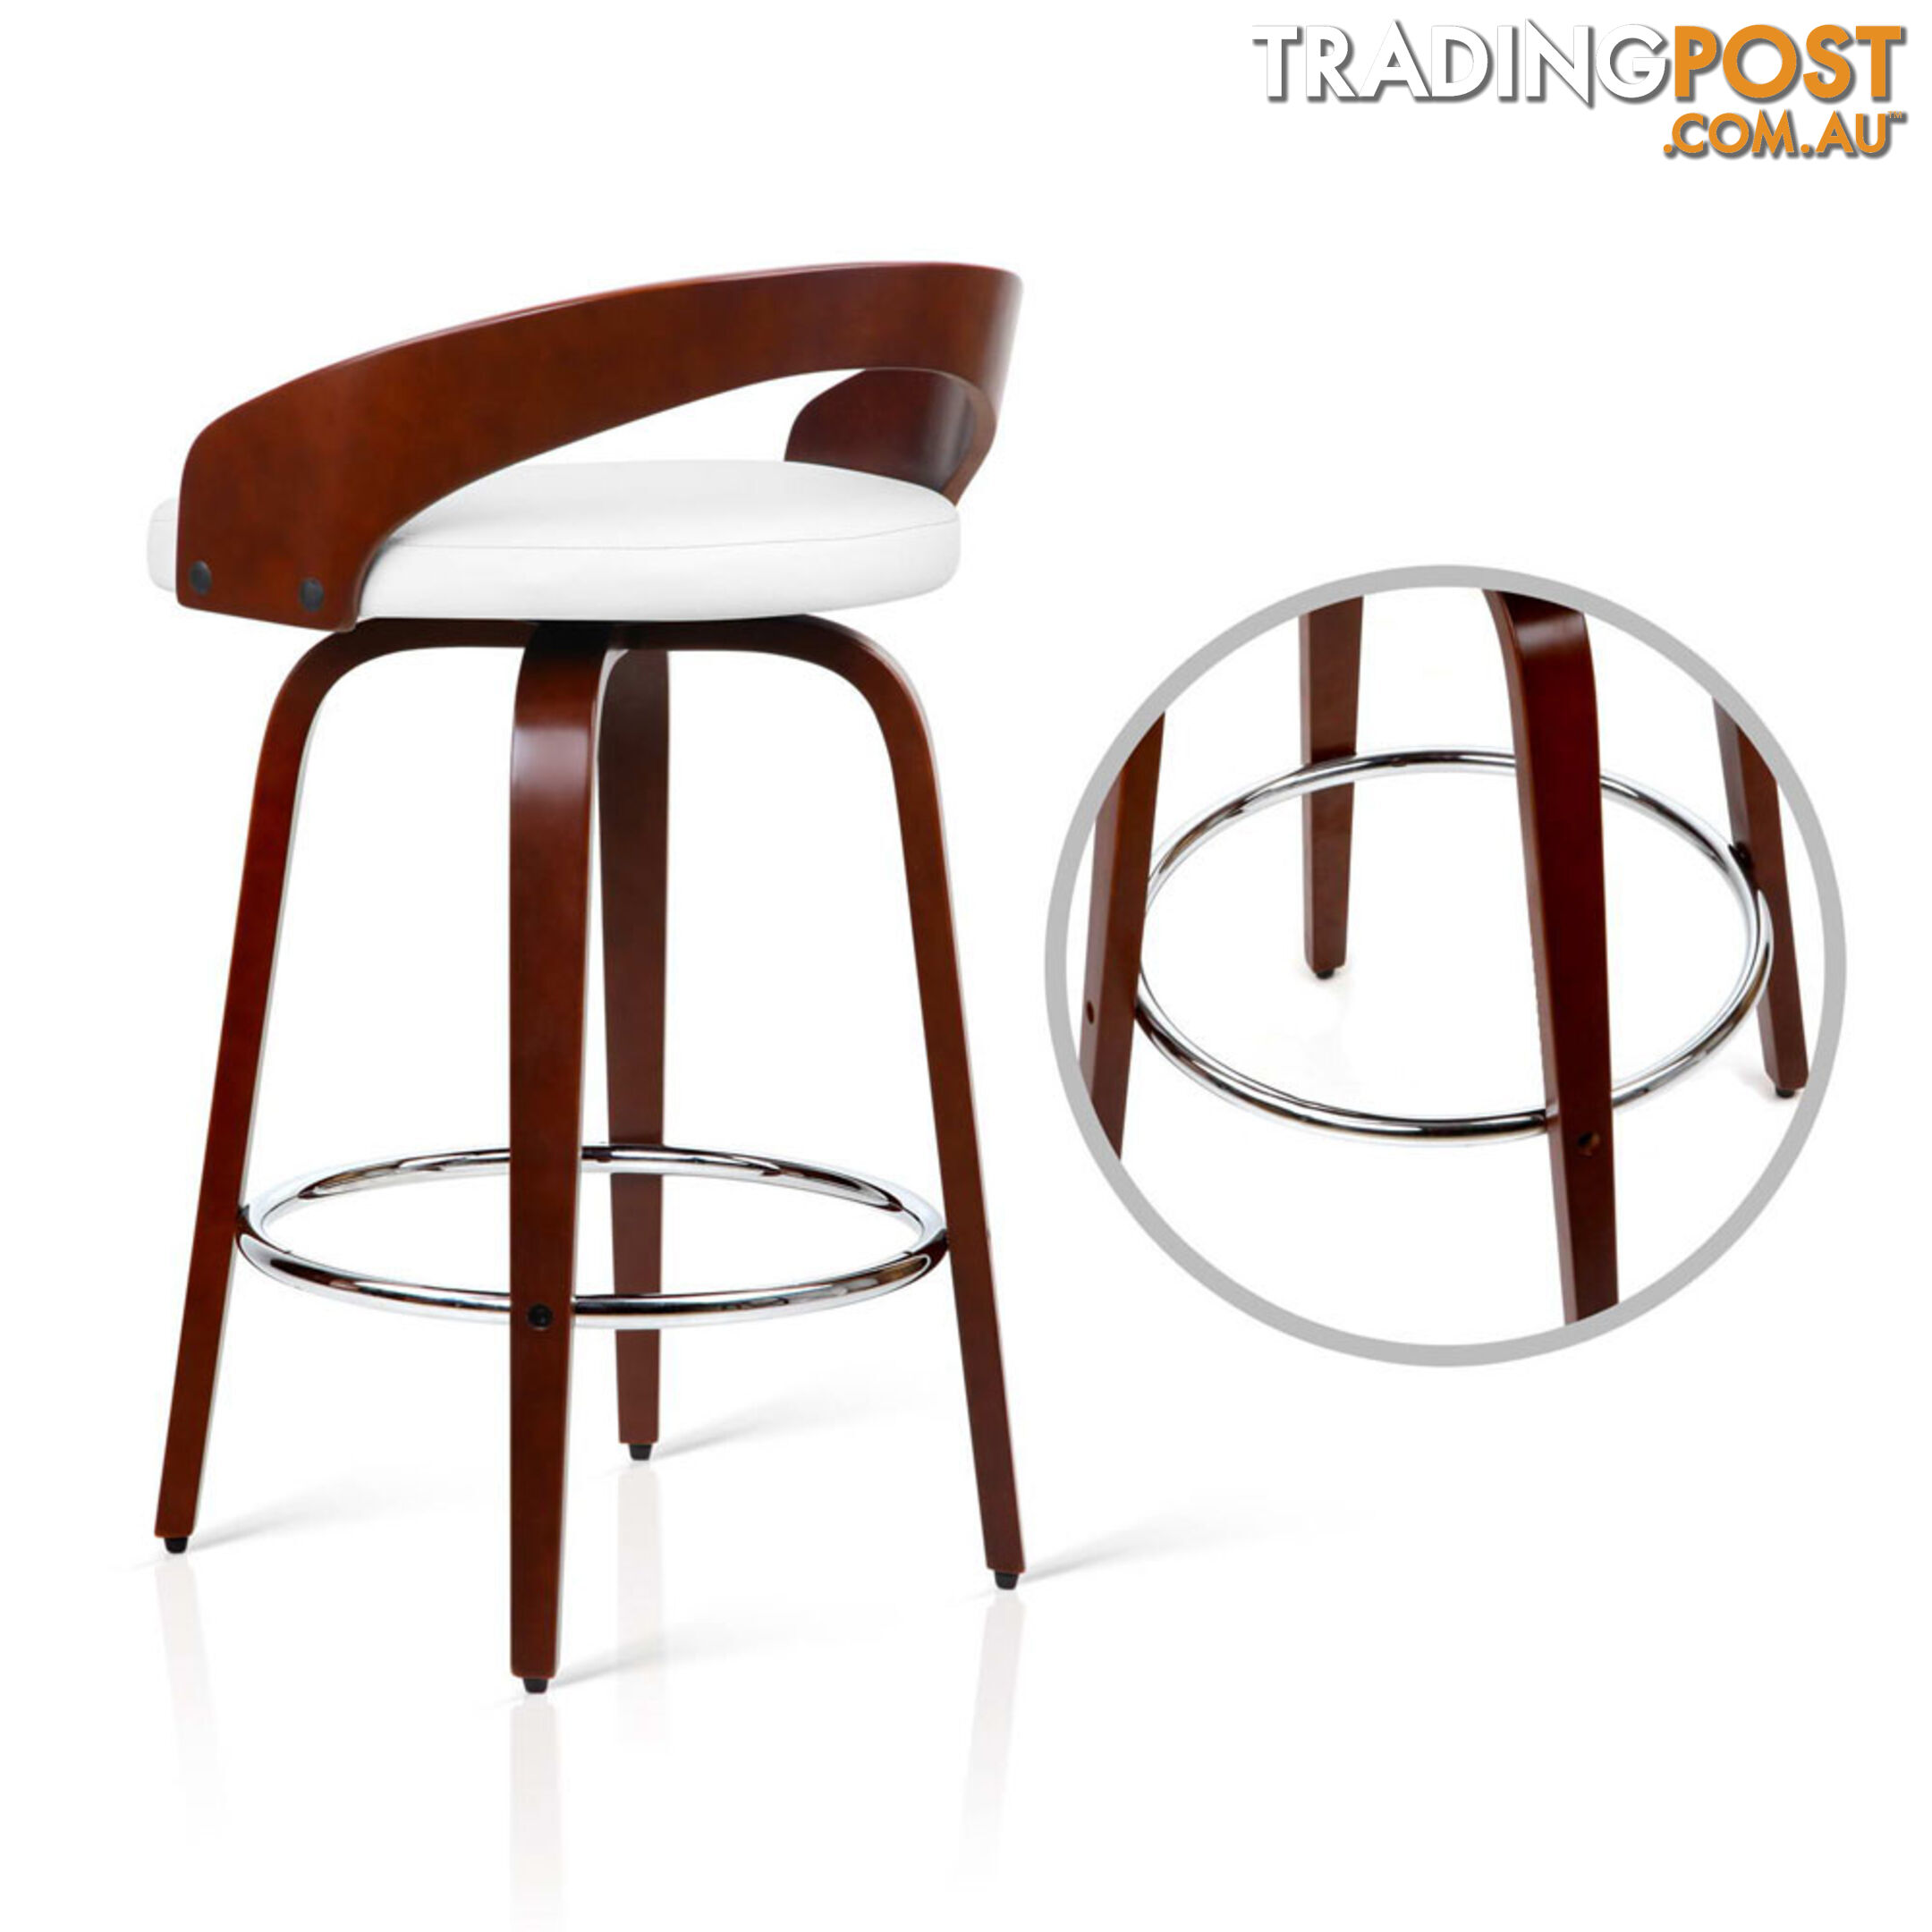 Set of 2 Cherry Wood Bar Stools with Chrome Footrest